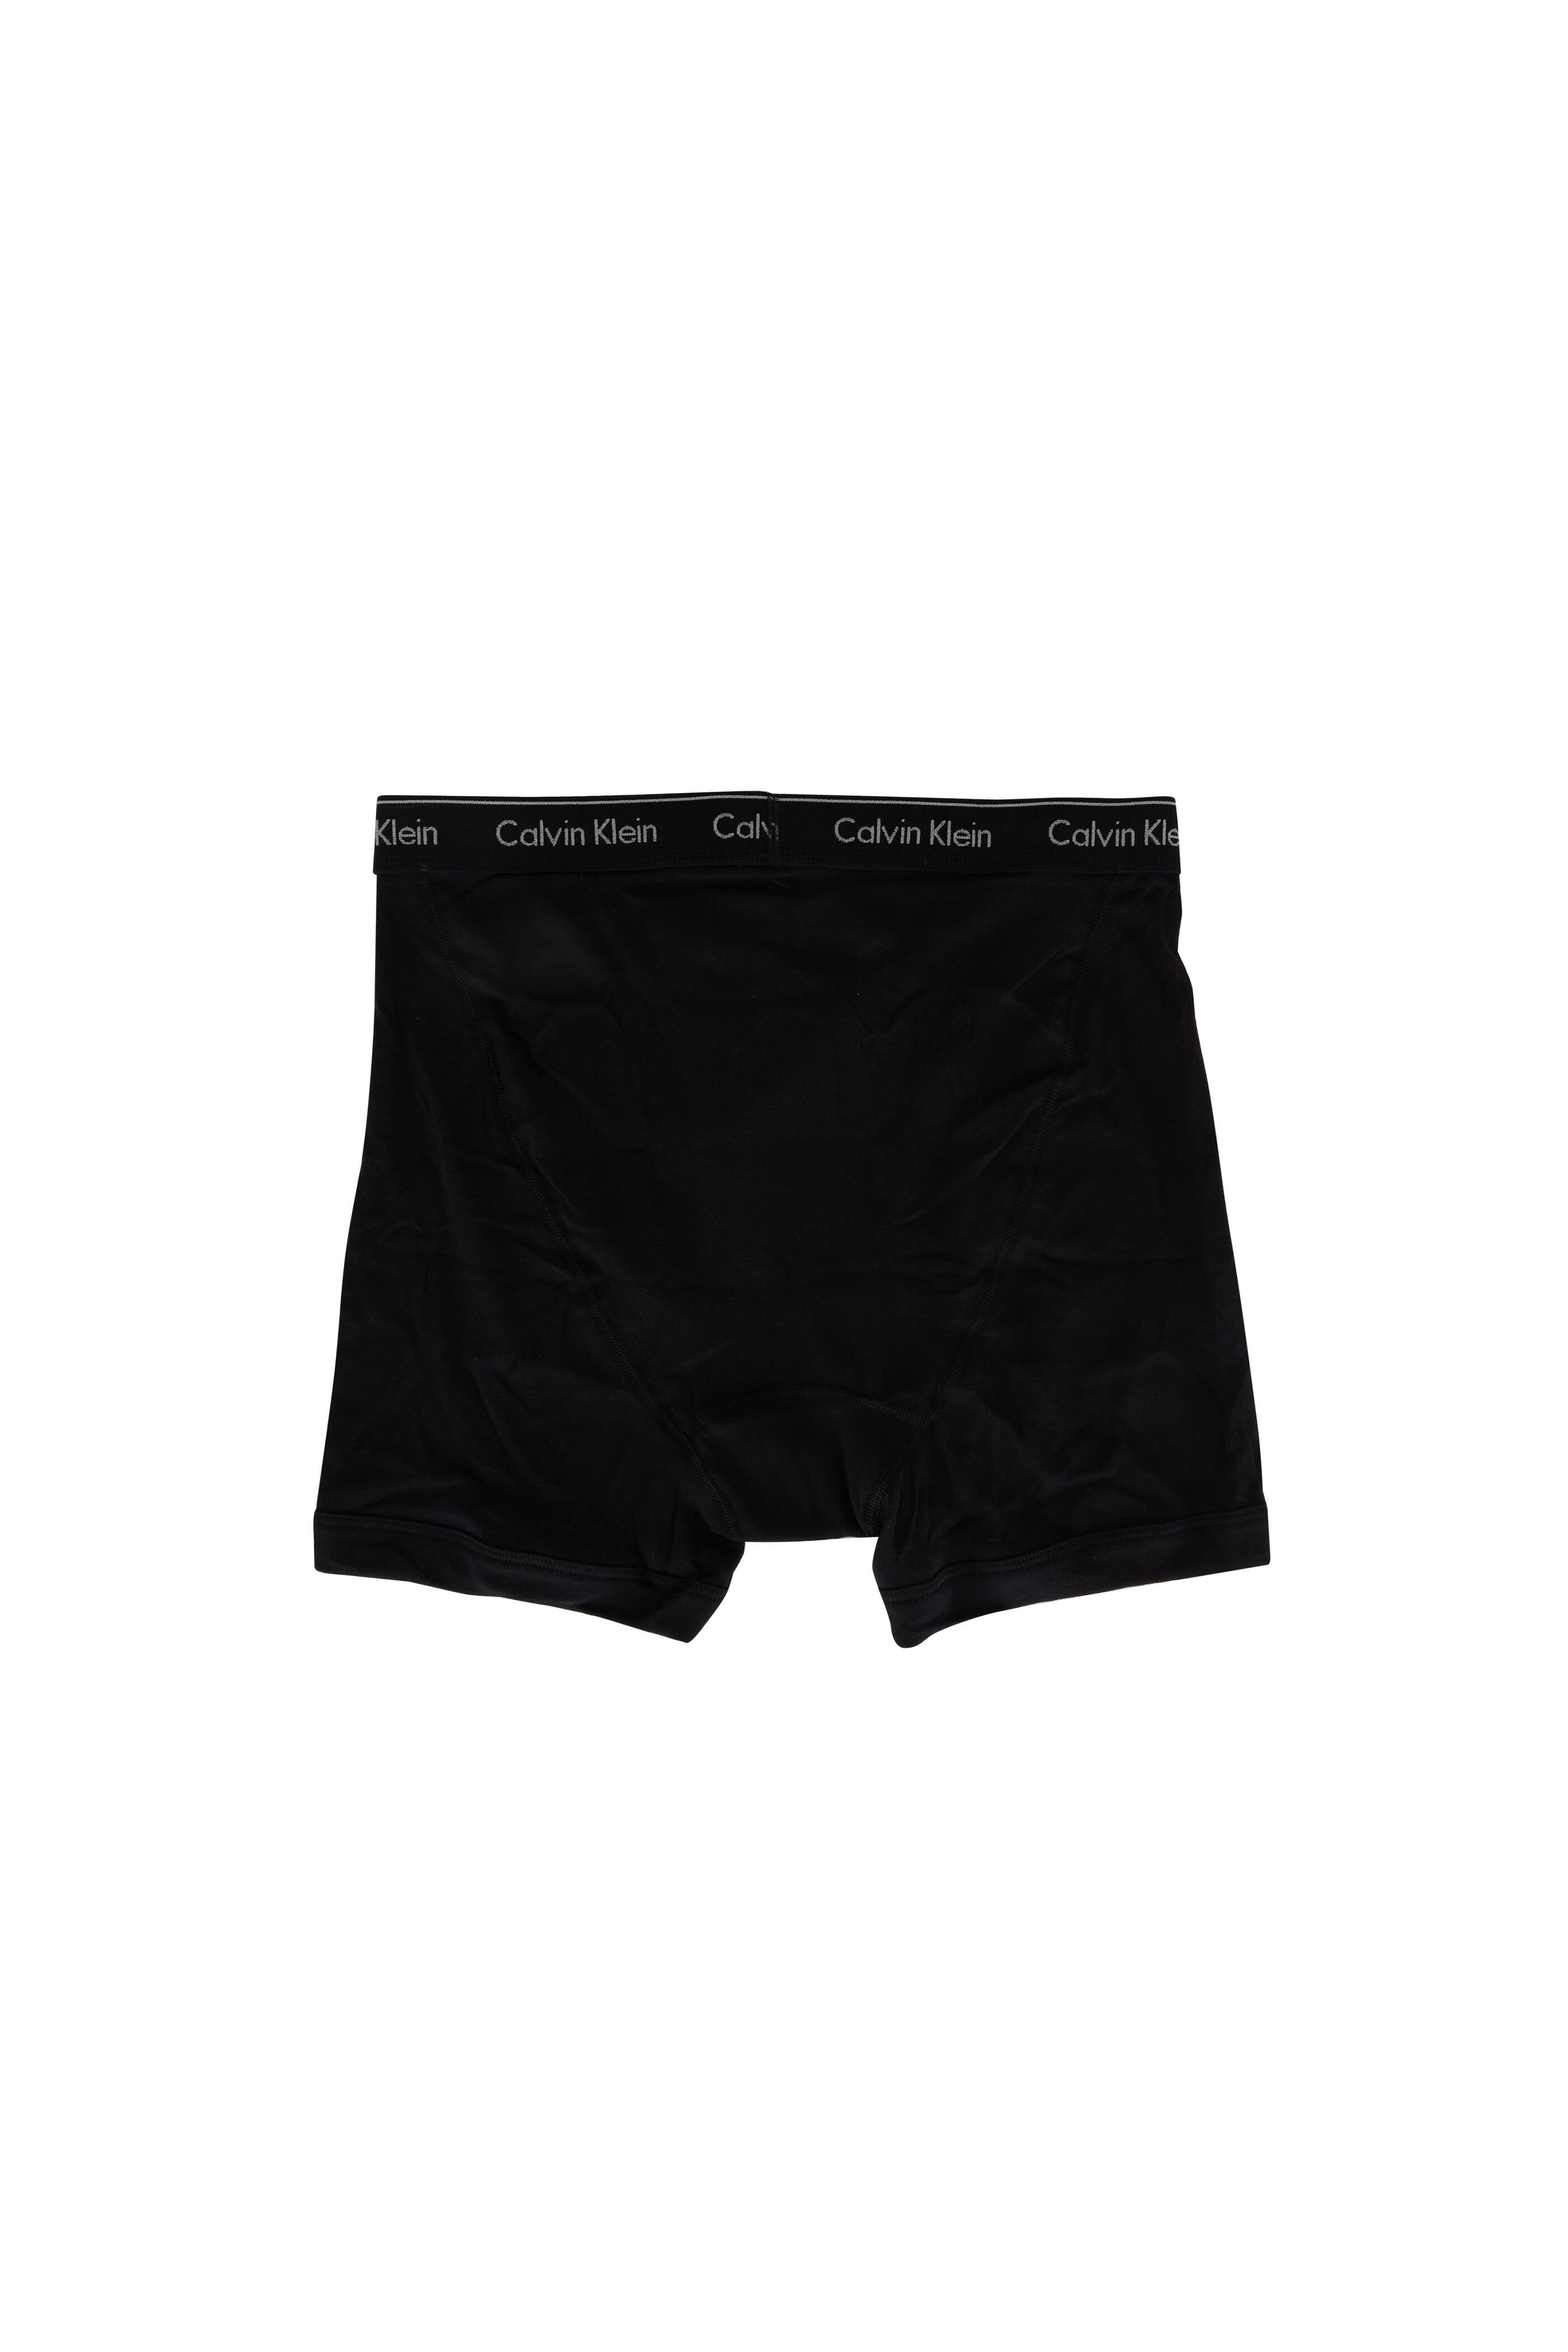 Calvin Klein Girls Black & White Knickers (2 Pack) | Junior Couture USA